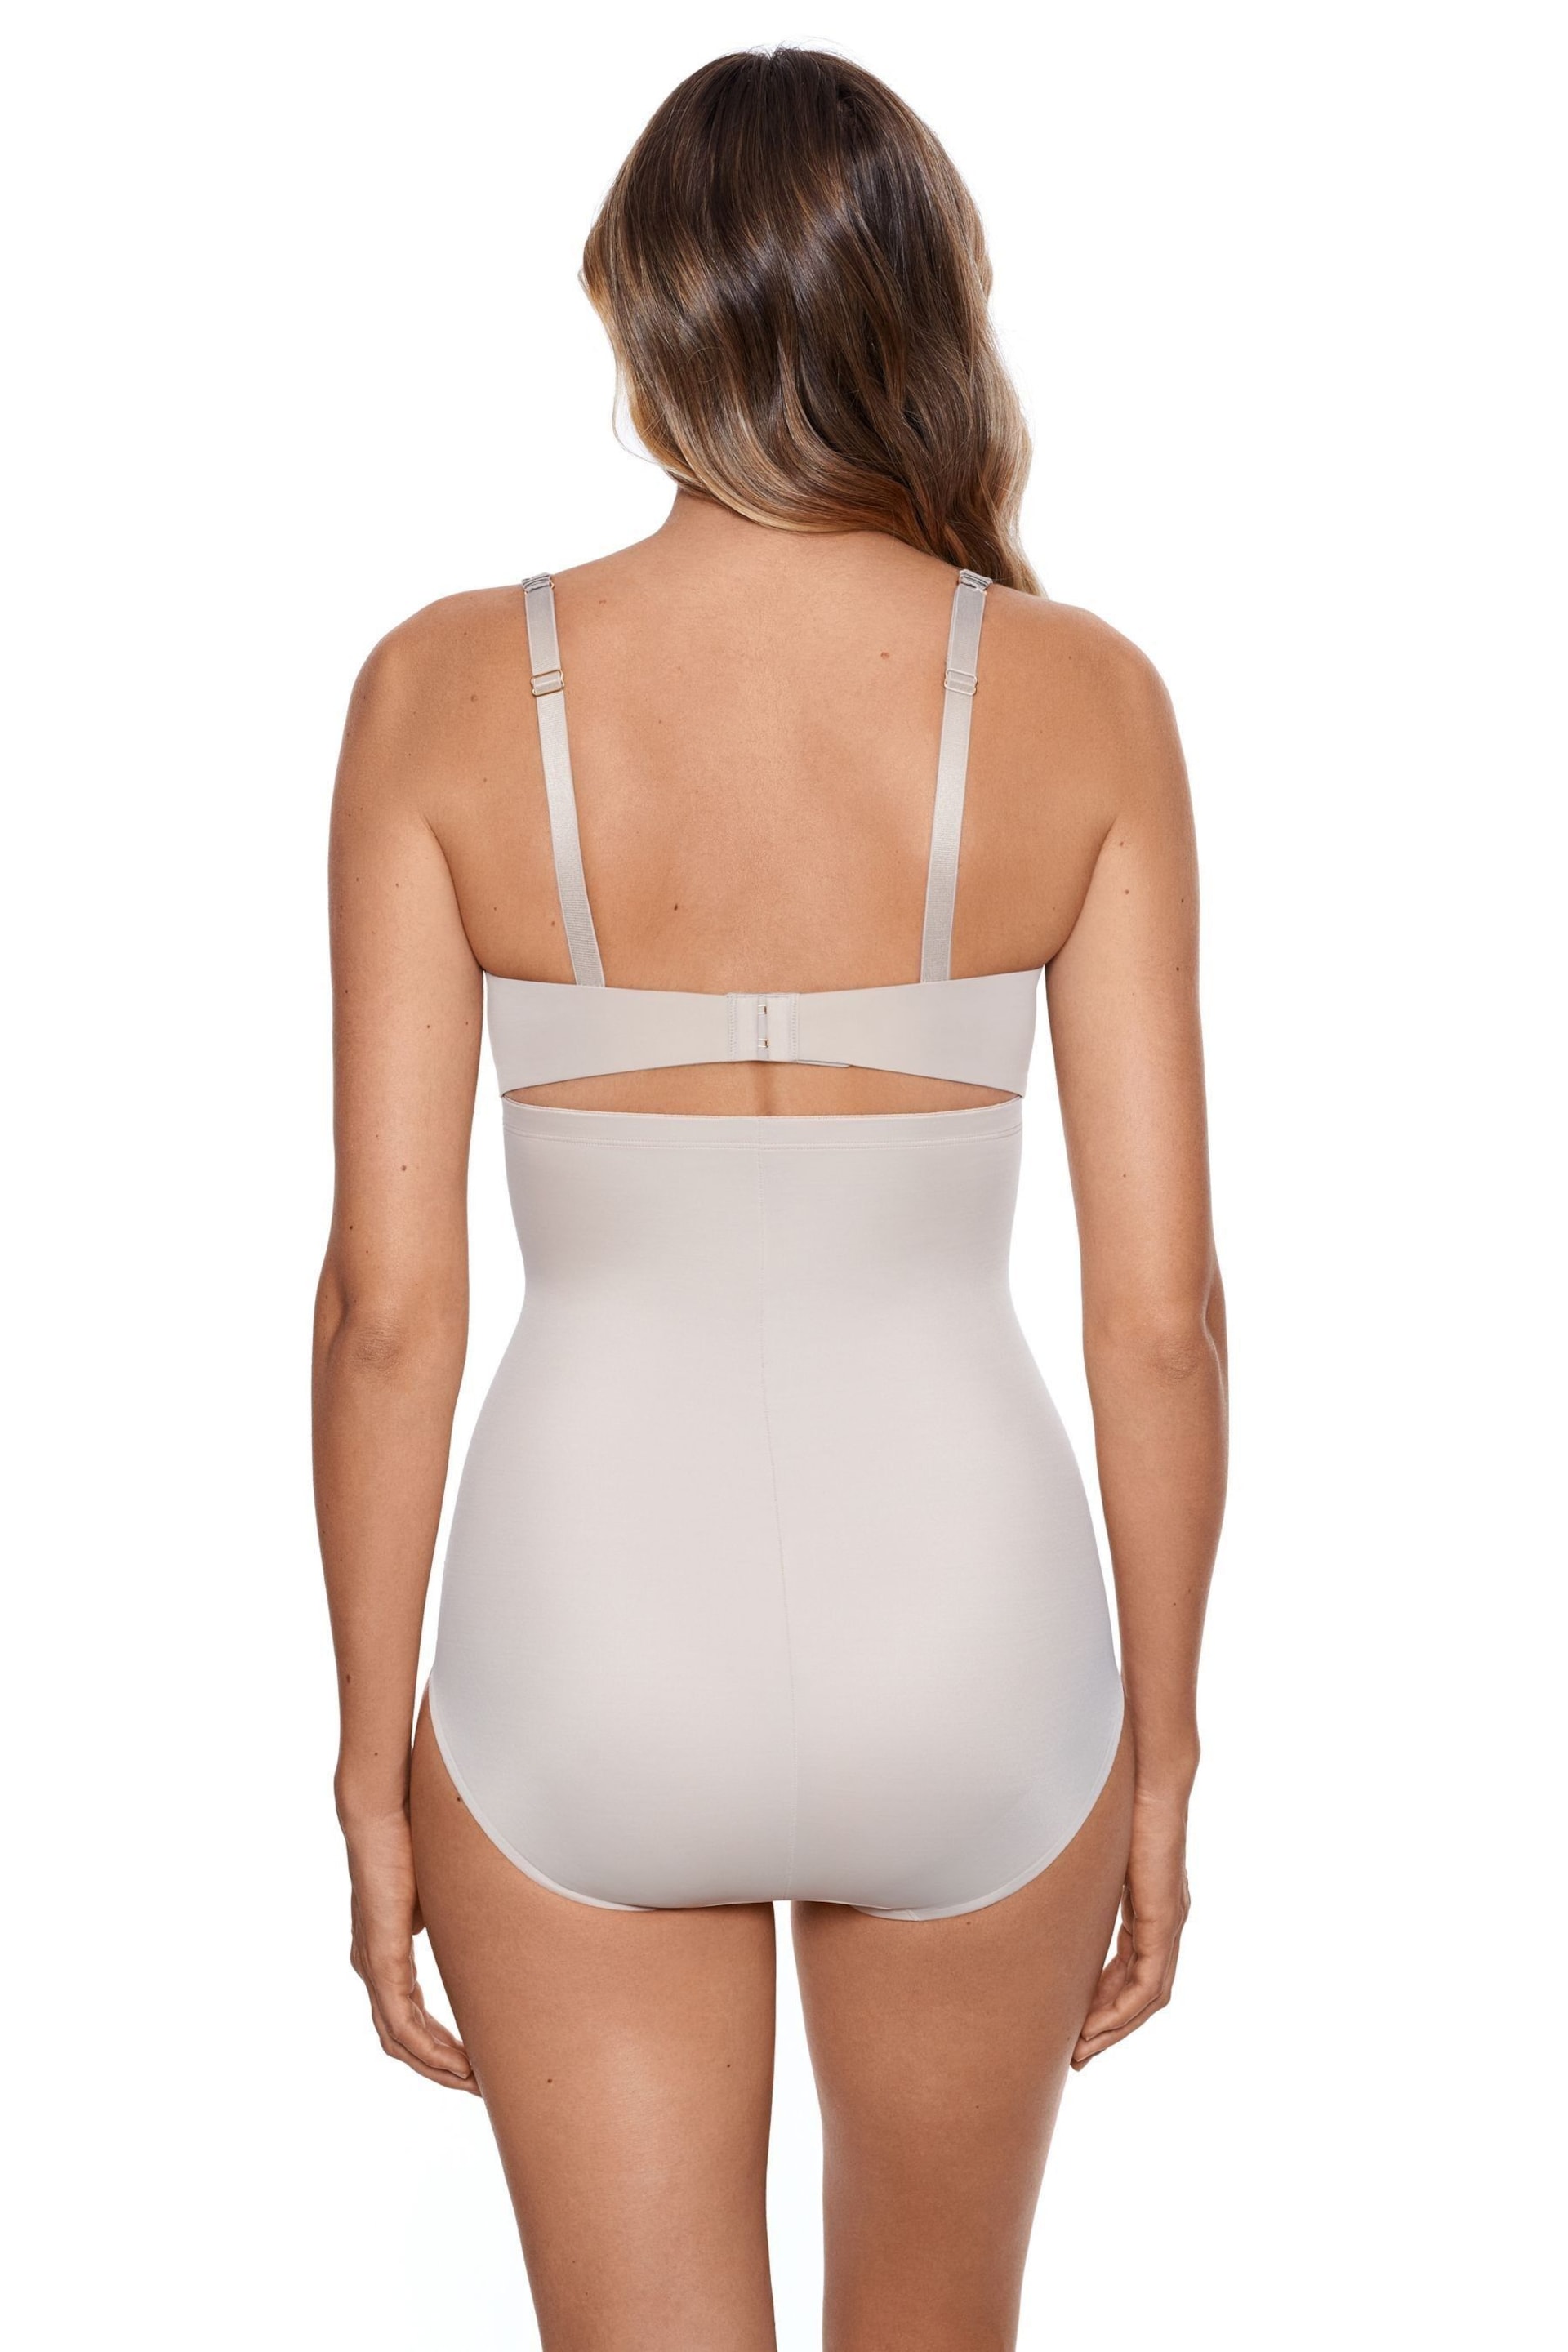 Miraclesuit Modern Miracle™ High-Waist Firm control Shaping Briefs - Image 2 of 3